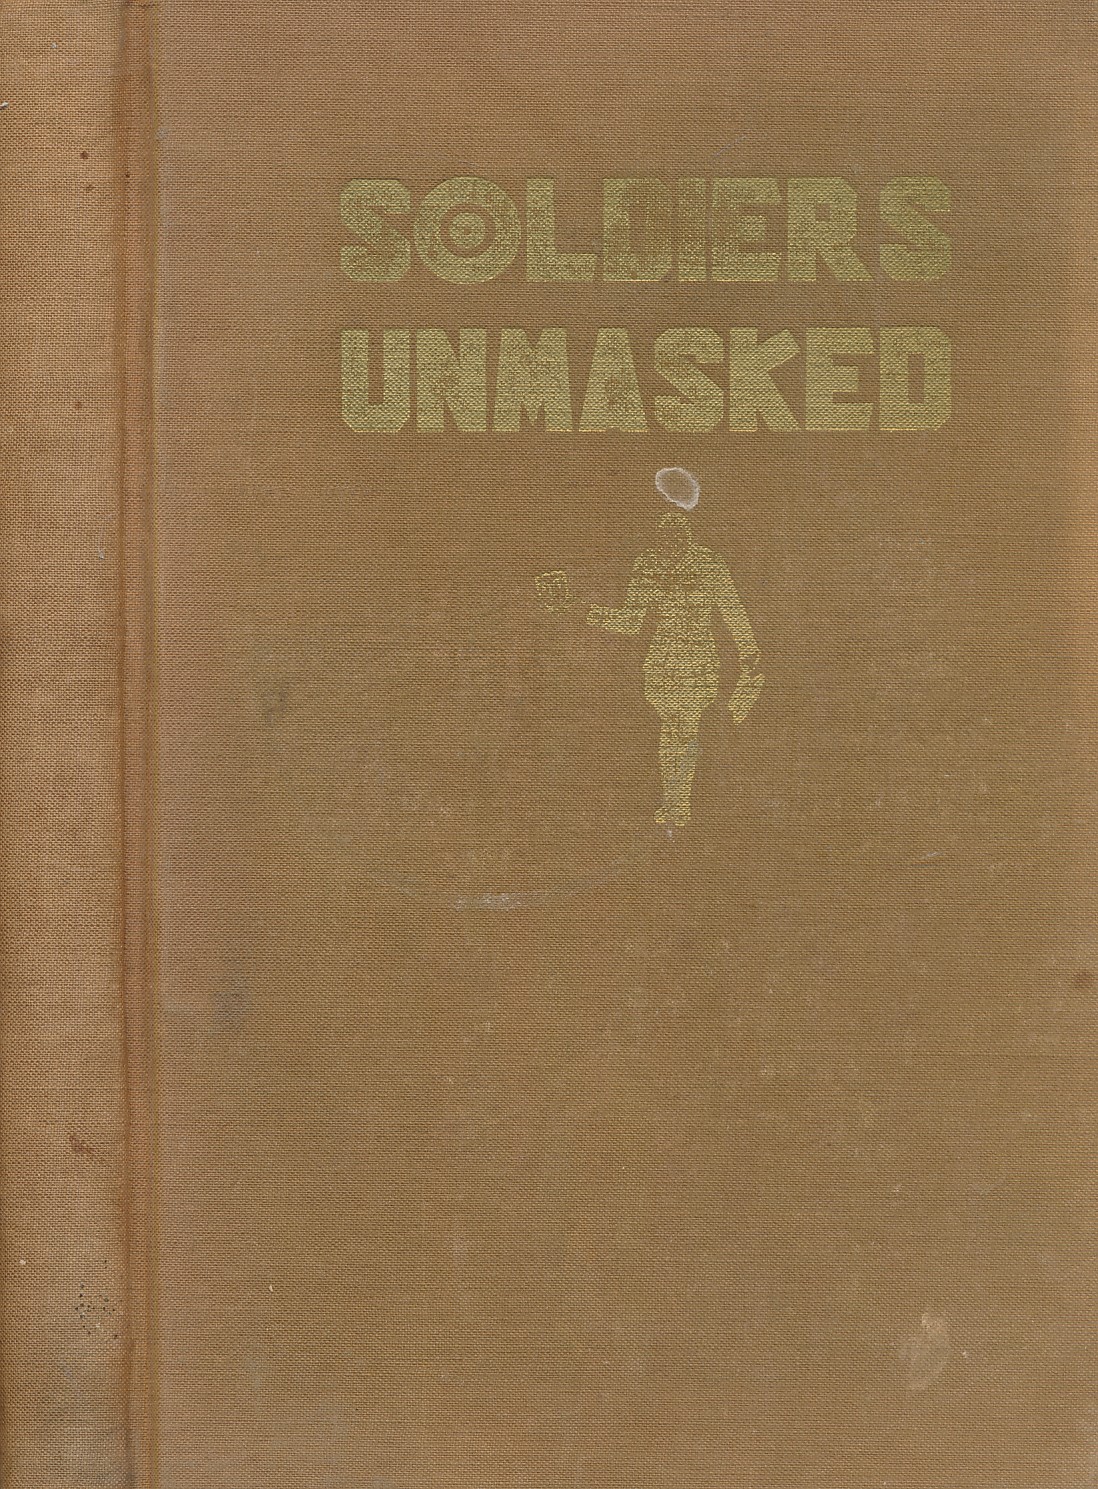 Soldiers Unmasked. Signed copy.